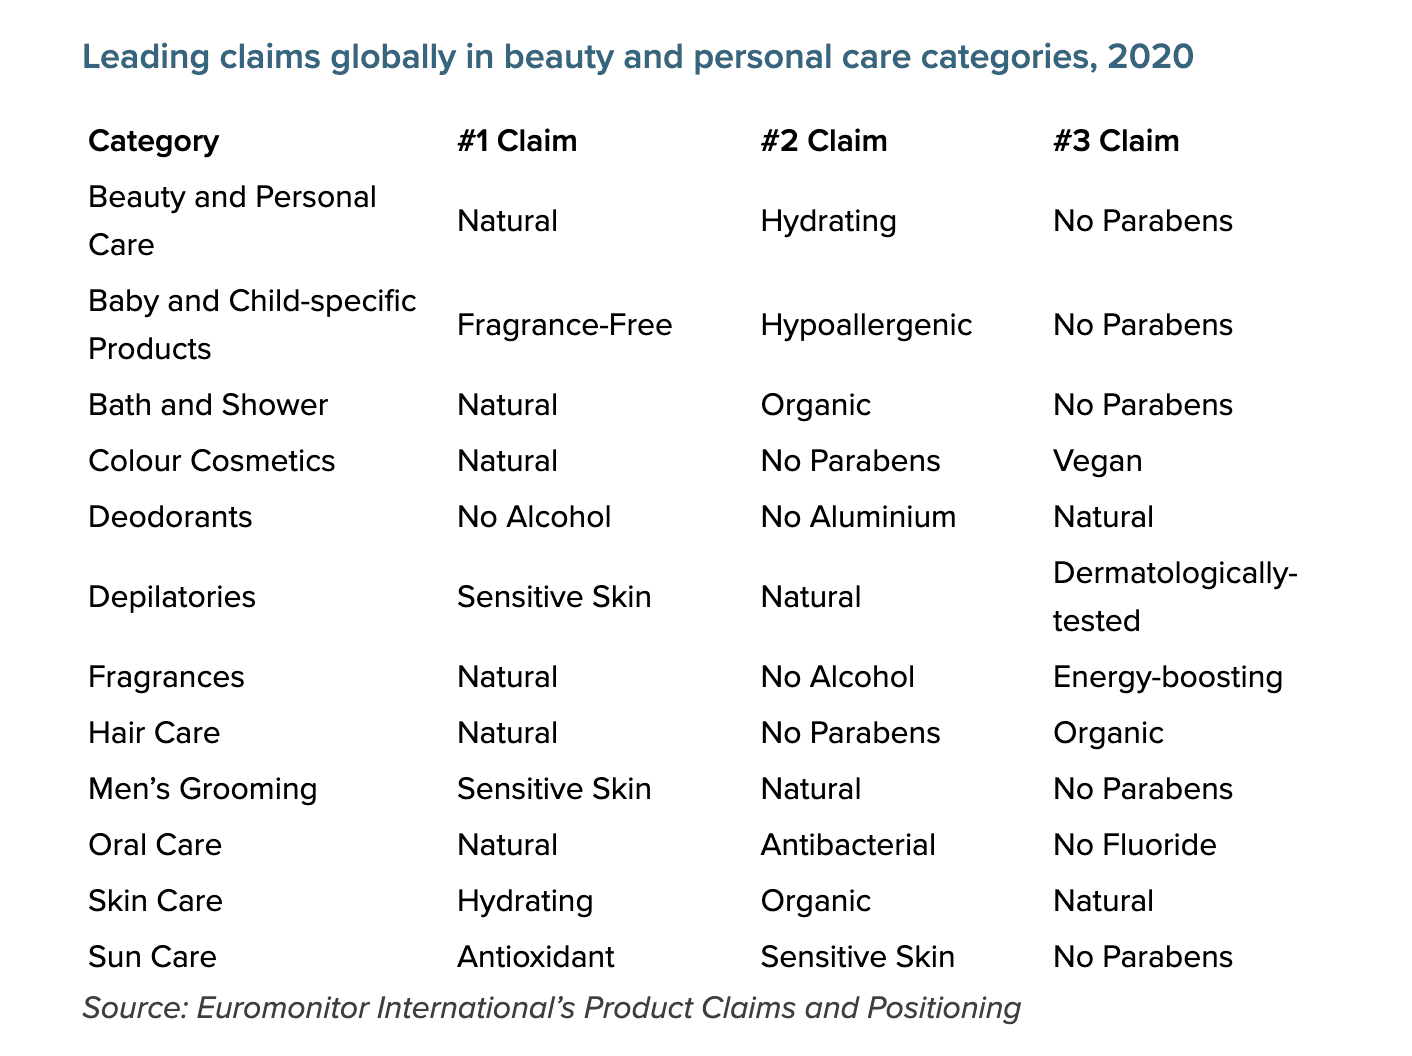 Leading claims globally in beauty and personal care categories in 2020